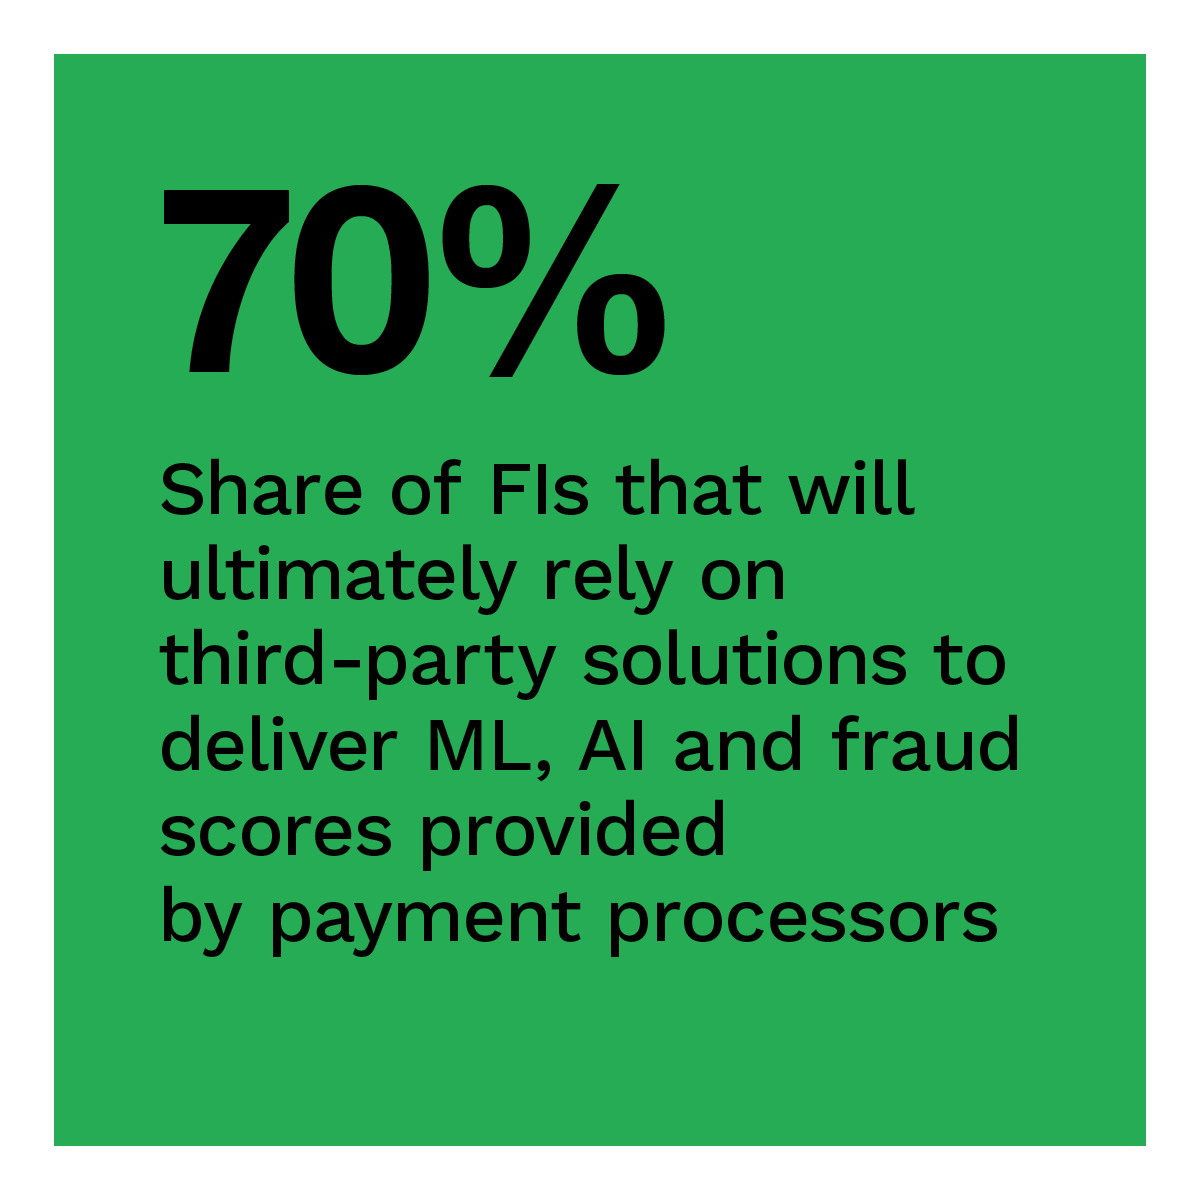  Share of FIs that will ultimately rely on third-party solutions to deliver ML, AI and fraud scores provided by payment processors